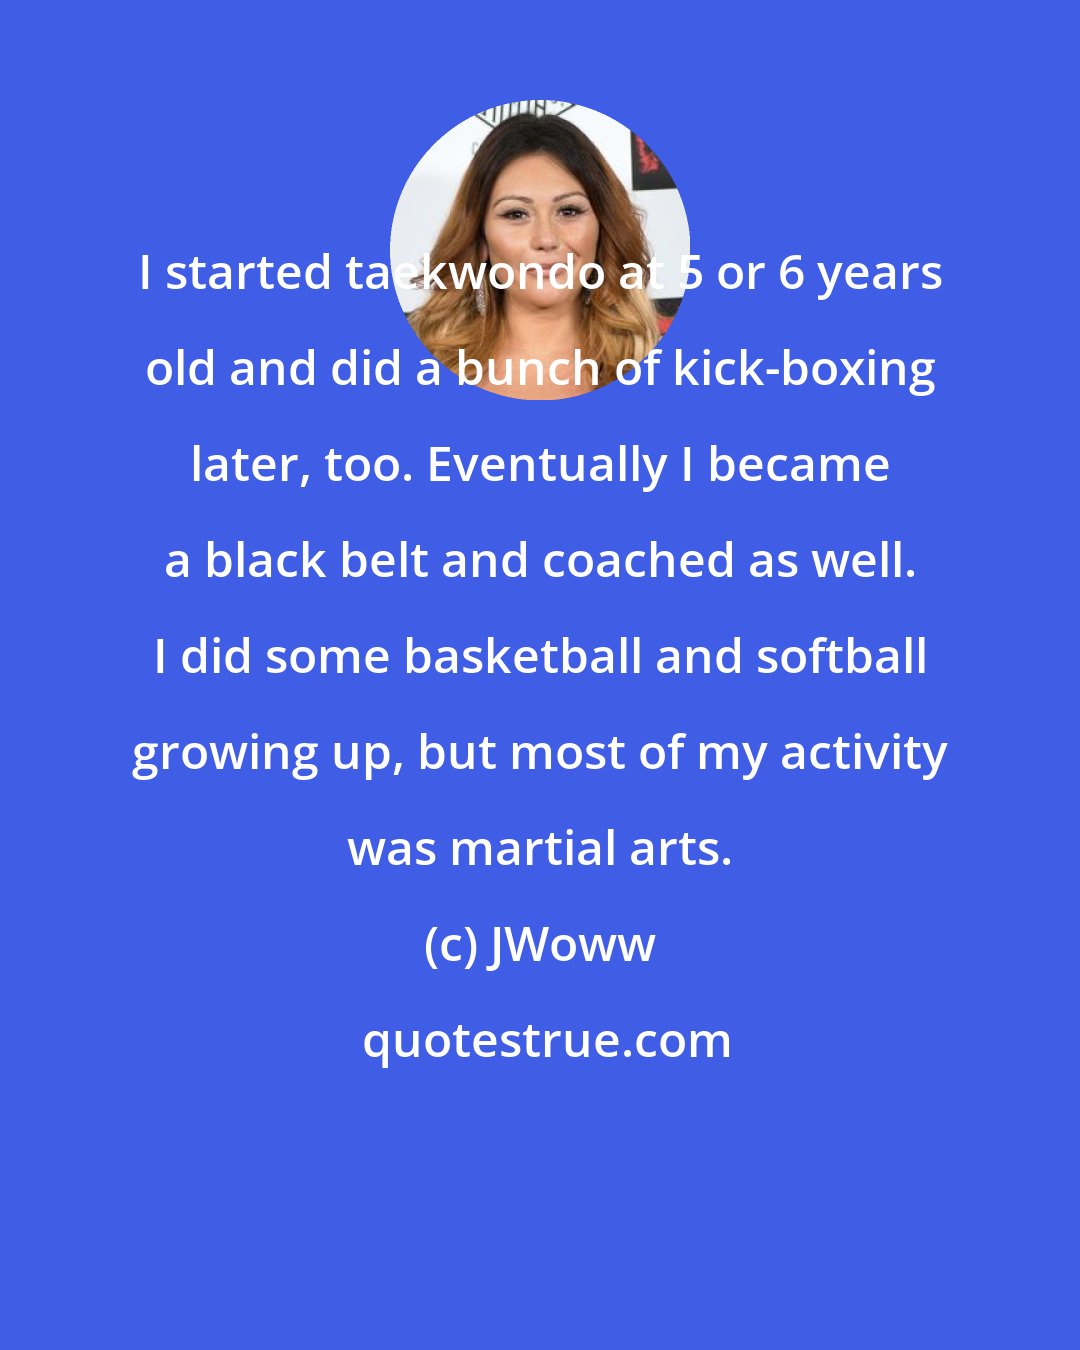 JWoww: I started taekwondo at 5 or 6 years old and did a bunch of kick-boxing later, too. Eventually I became a black belt and coached as well. I did some basketball and softball growing up, but most of my activity was martial arts.